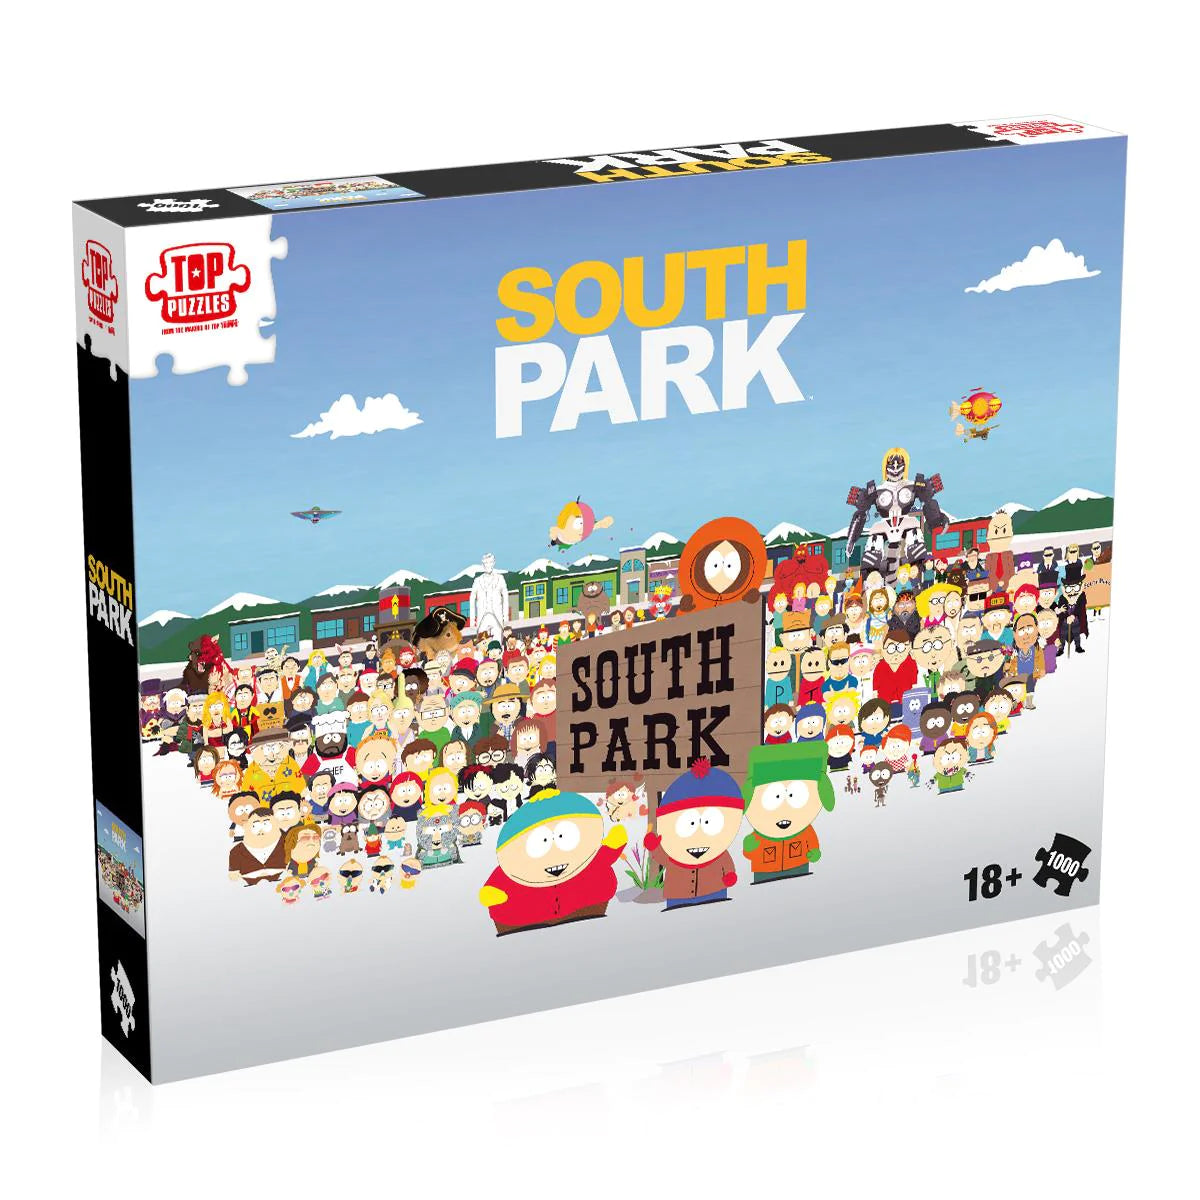 South Park 1000pc Puzzle Jigsaw Puzzle - Loaded Dice